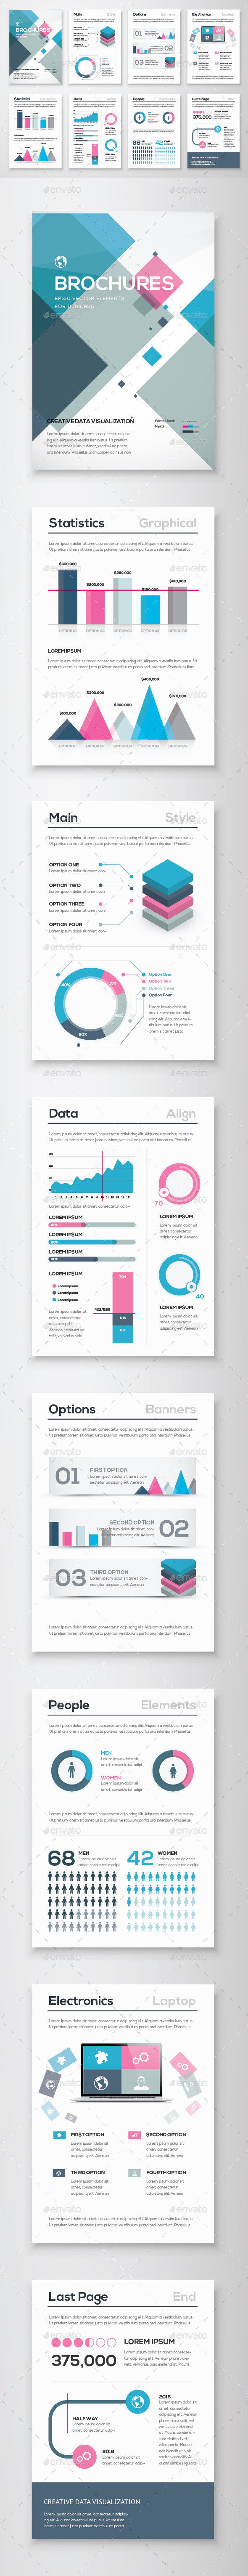 Infographic 20tools 2015 20boxed 20pink 20blue 20gr